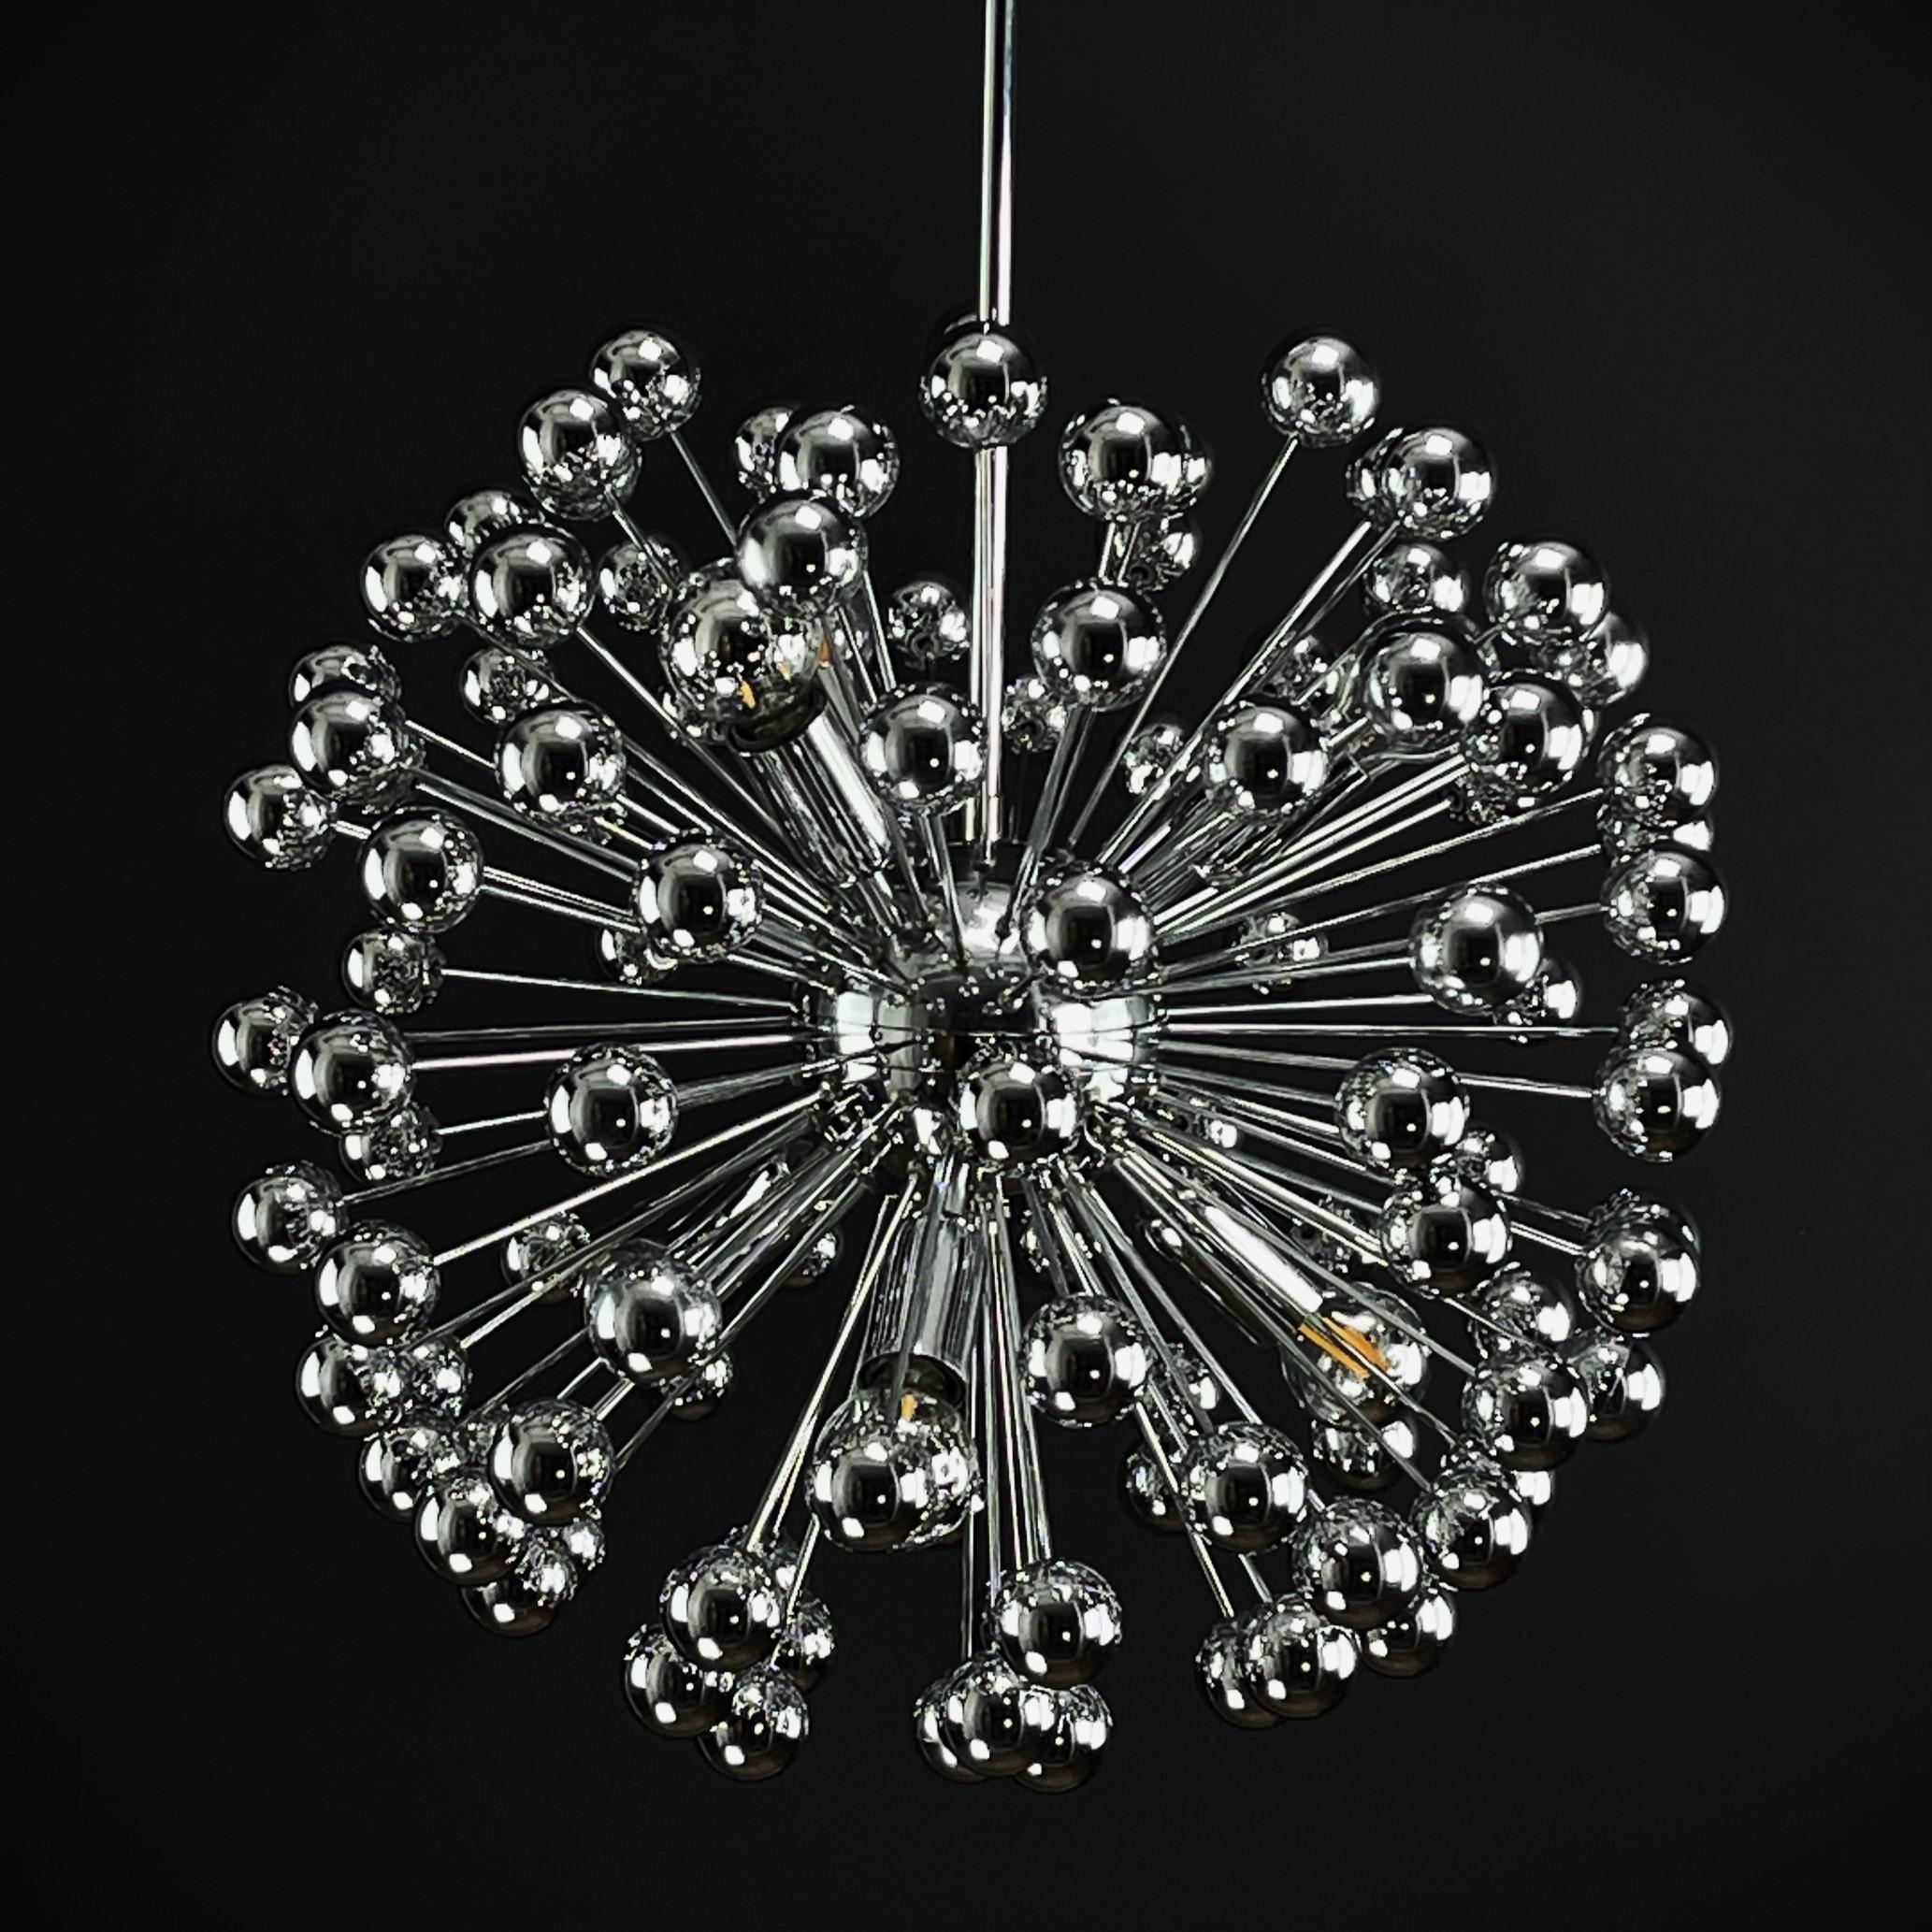 big sputnik ceiling lamp - 1970s

This stylish Sputnik chrome lamp from the 70s is a timeless design piece that perfectly embodies the charm and elegance of this era. With its striking sputnik design, this lamp is a real eye-catcher that adds a